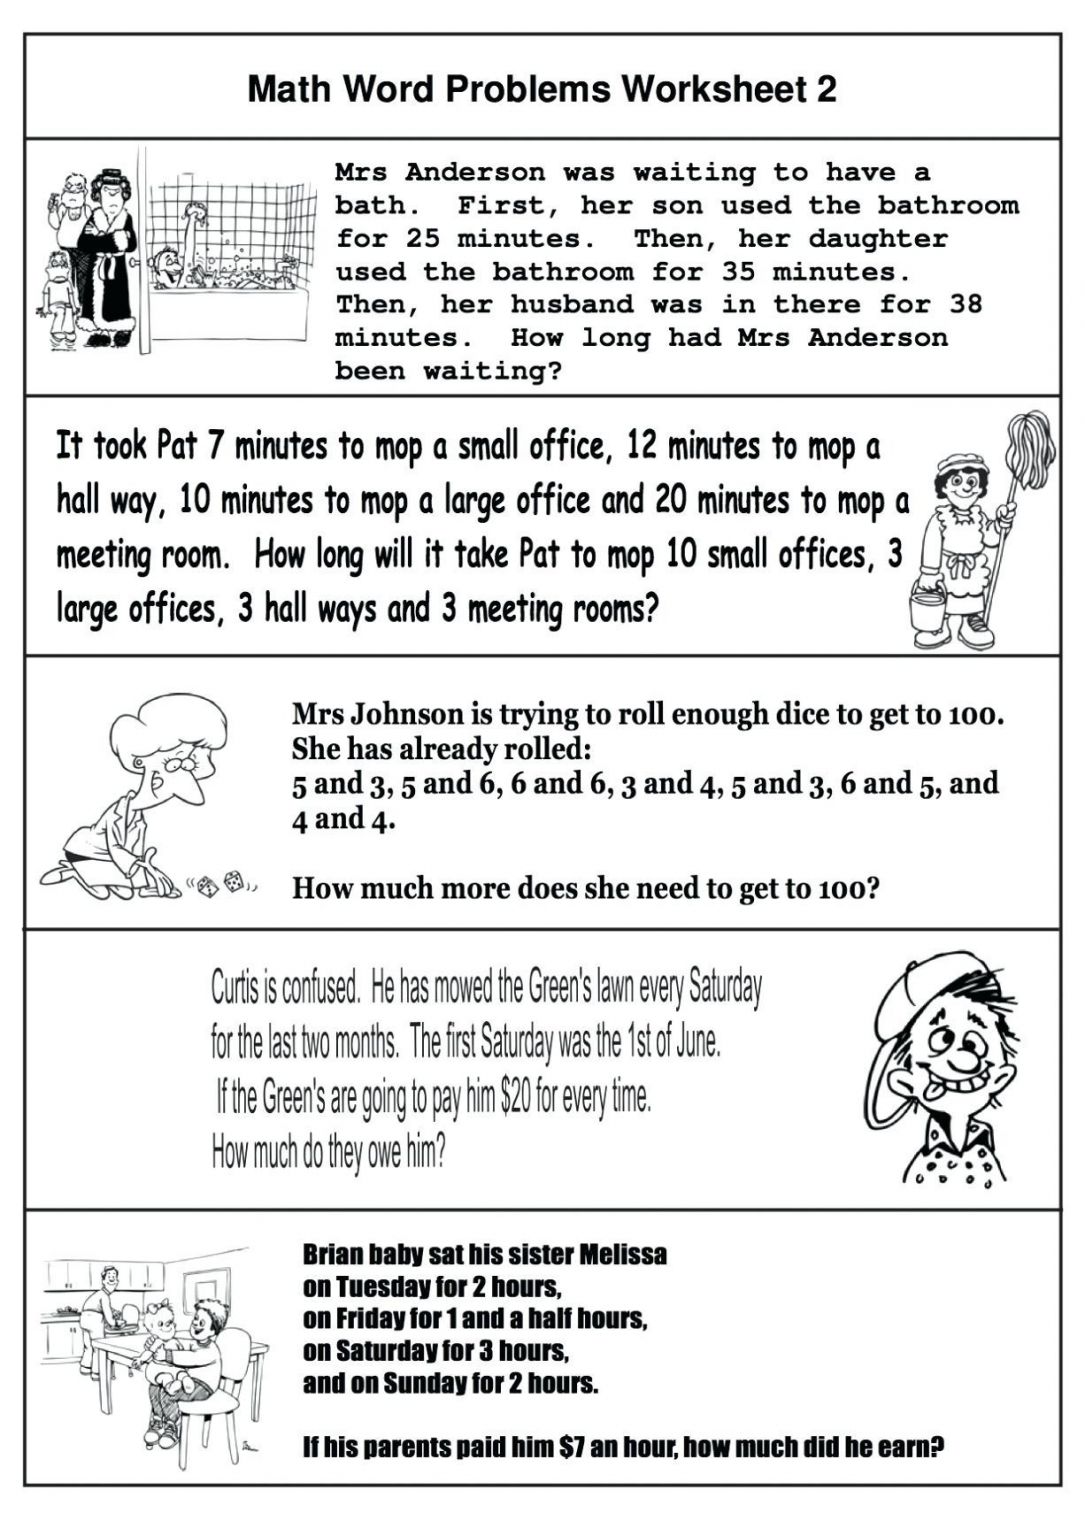 5-free-math-worksheets-fourth-grade-4-addition-adding-3-digit-and-1